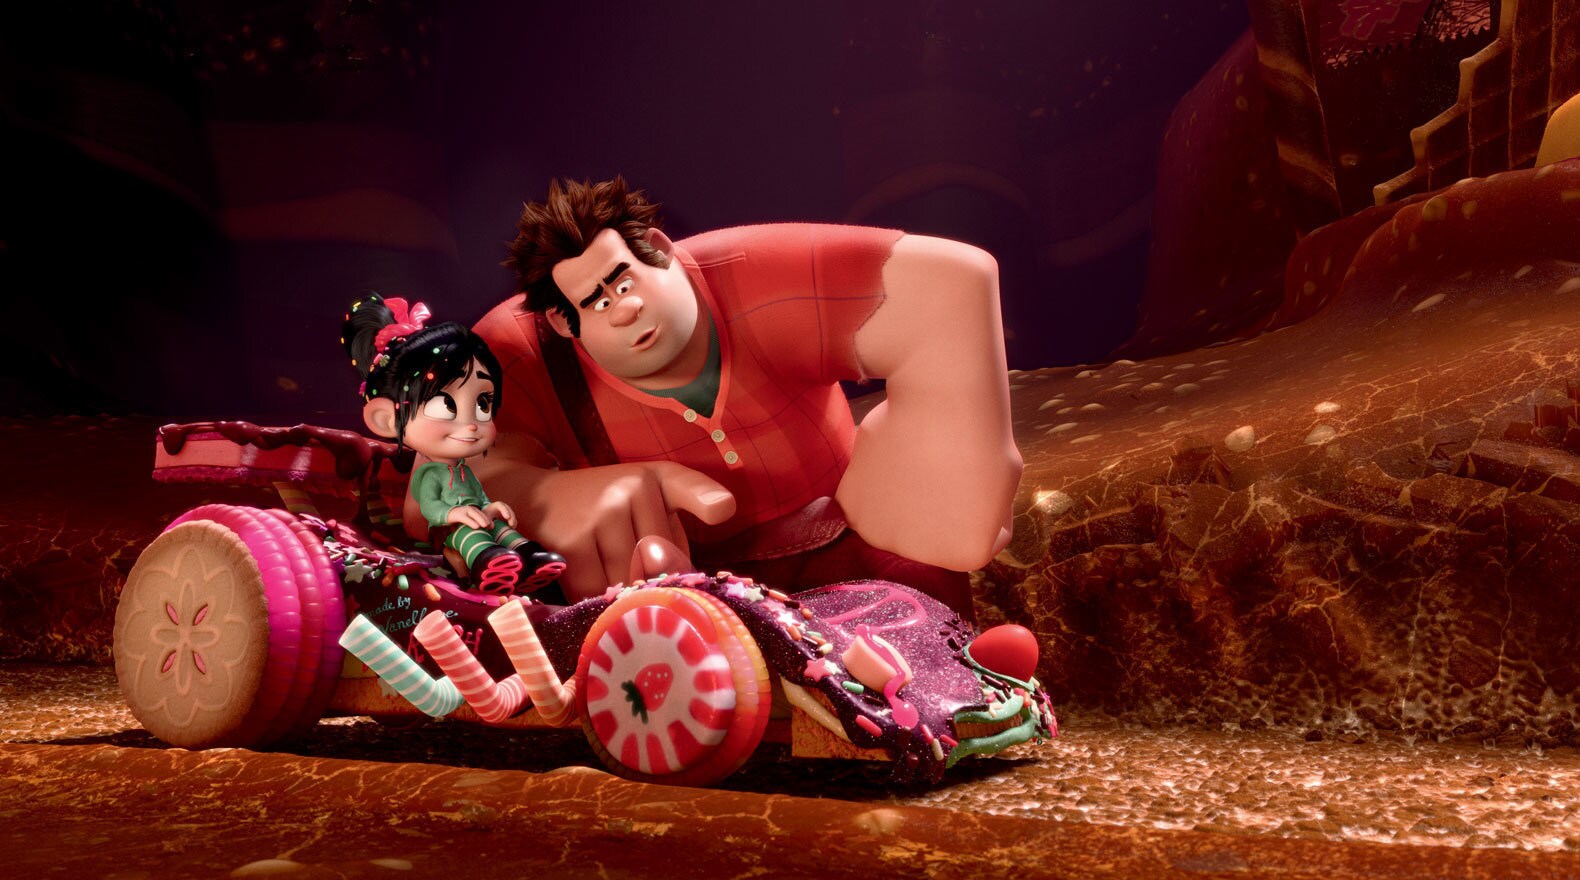 Ralph has to teach Vanellope how to drive in time for the big race.